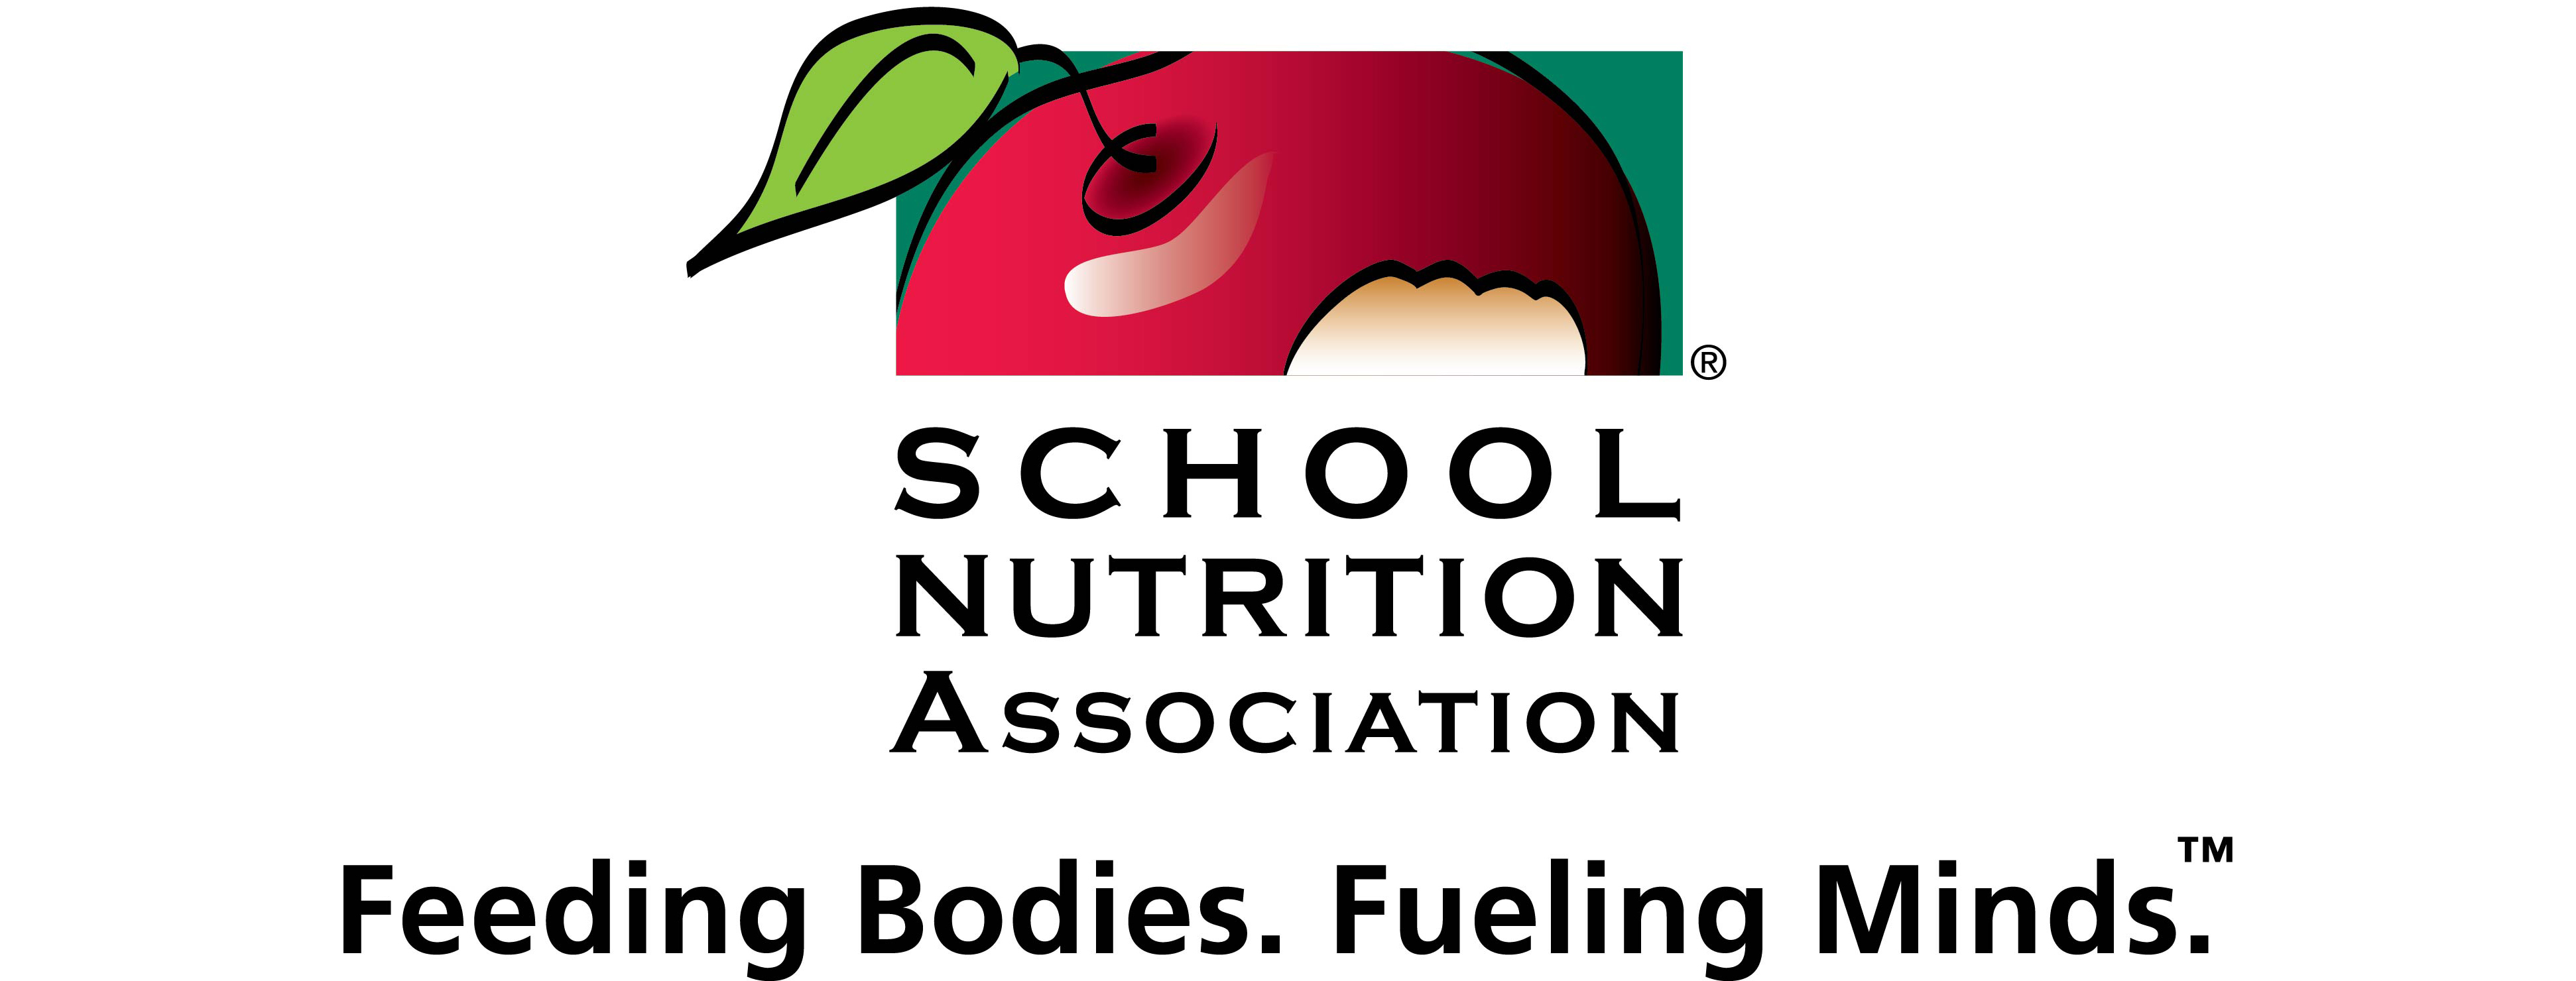 School Nutrition Association Annual National Conference